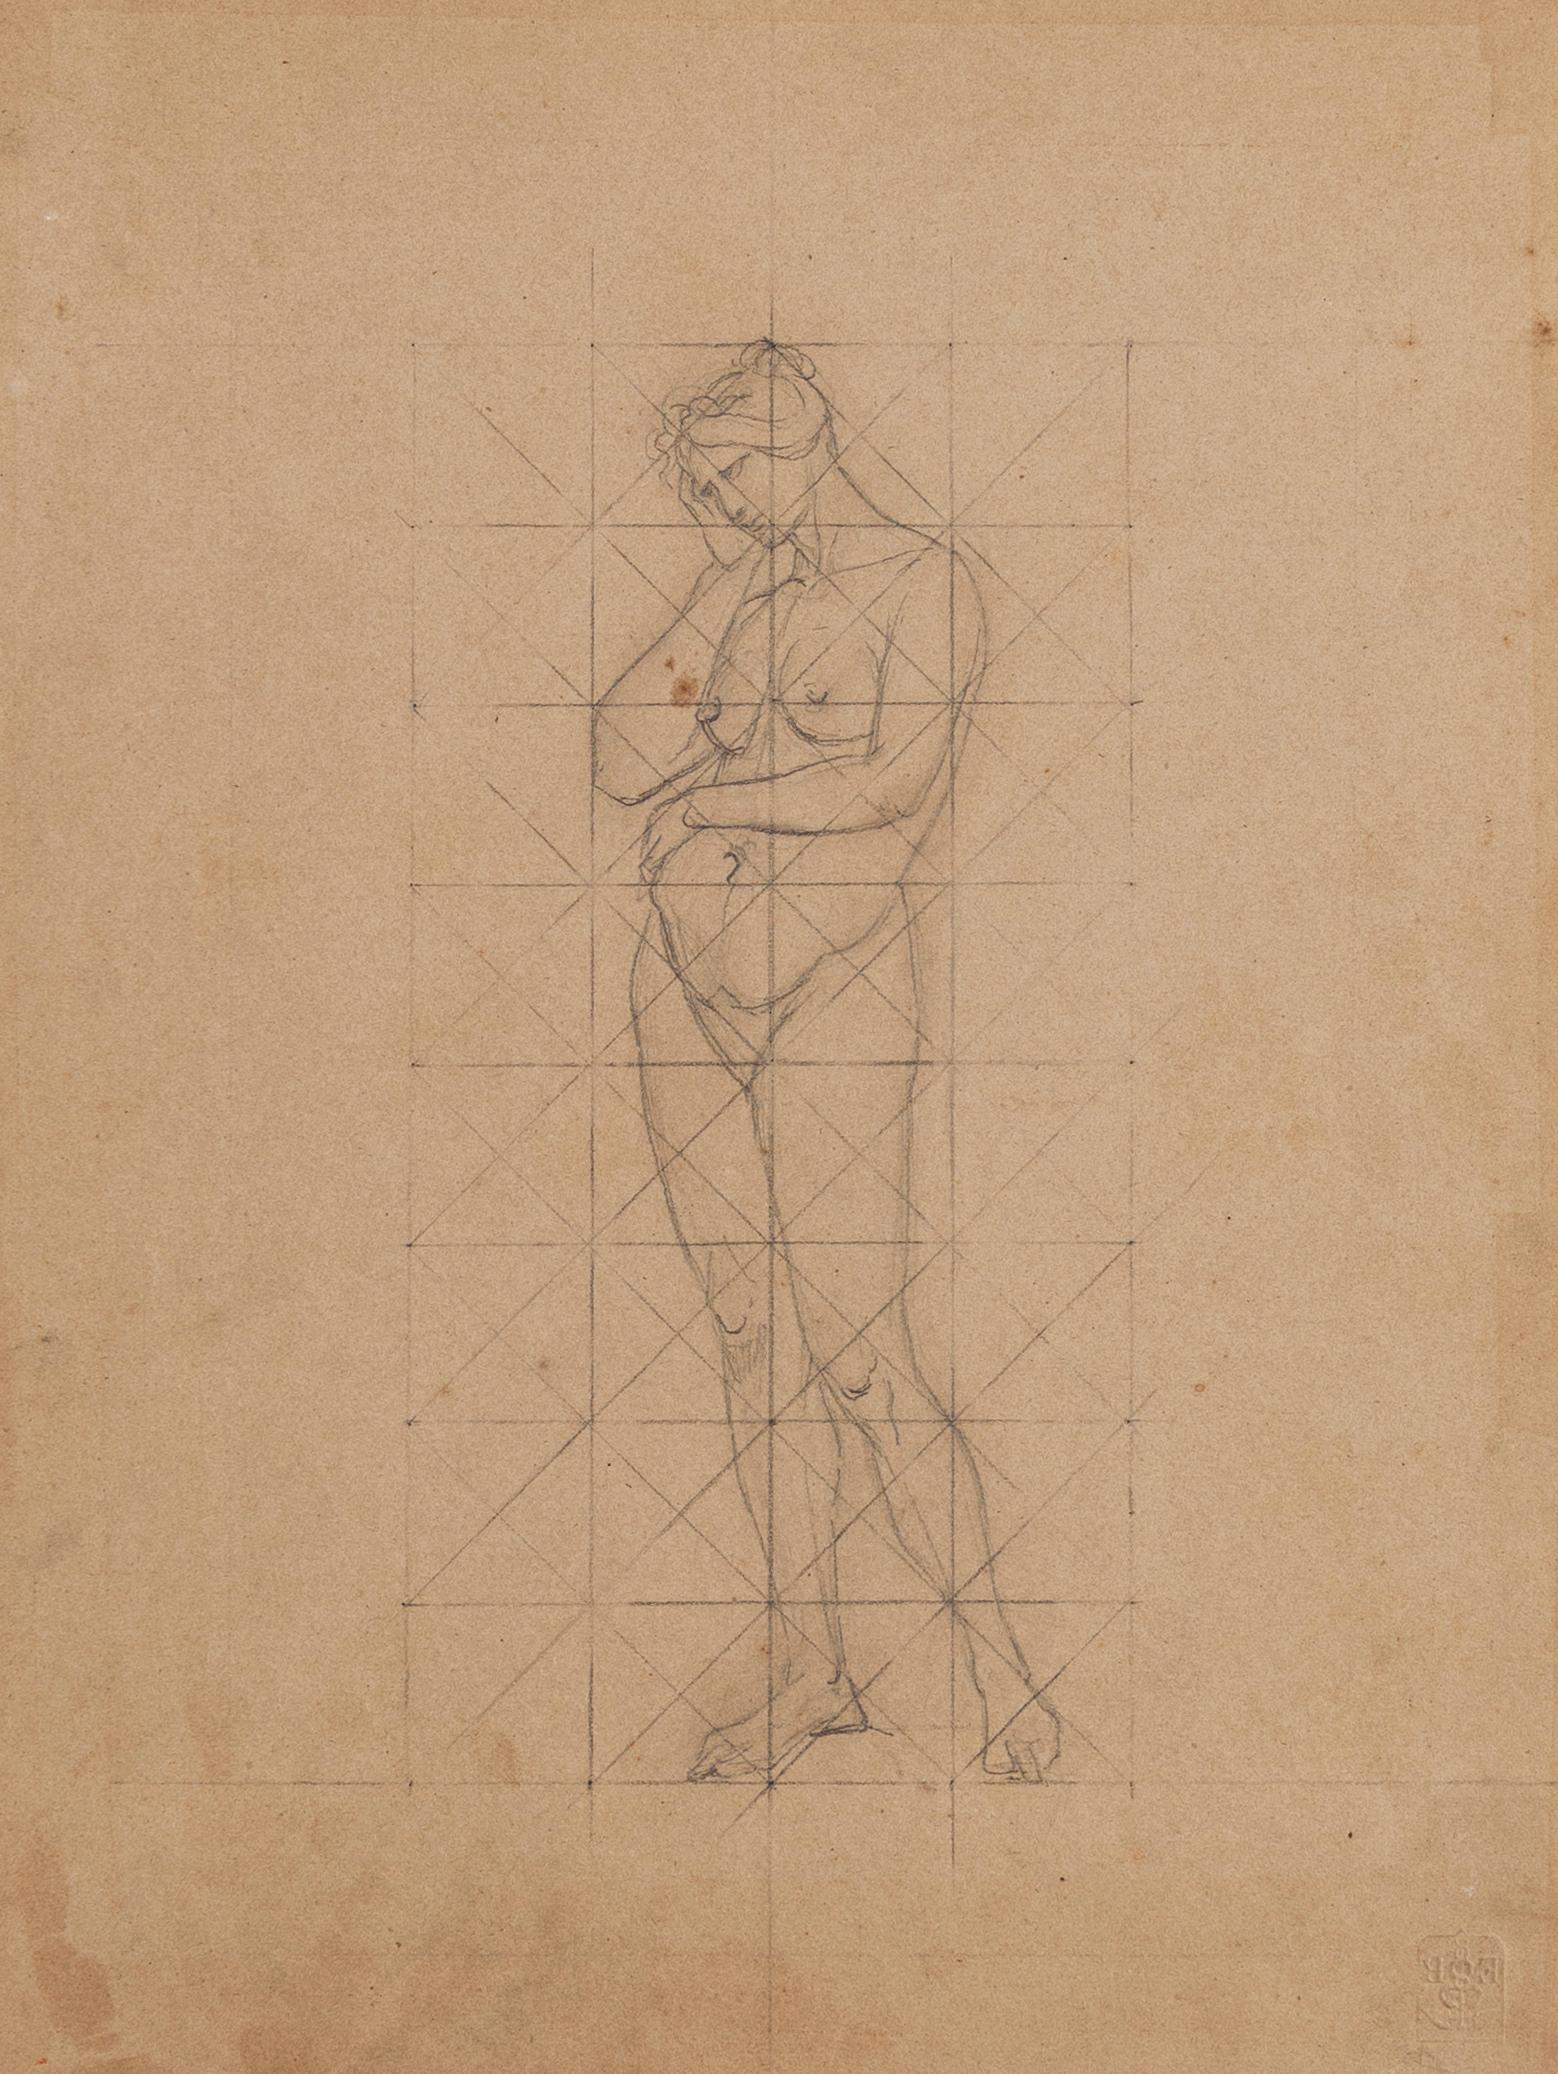 Study of Figures - Ink and Pencil Drawing by M. Dumas - Mid 19th Century